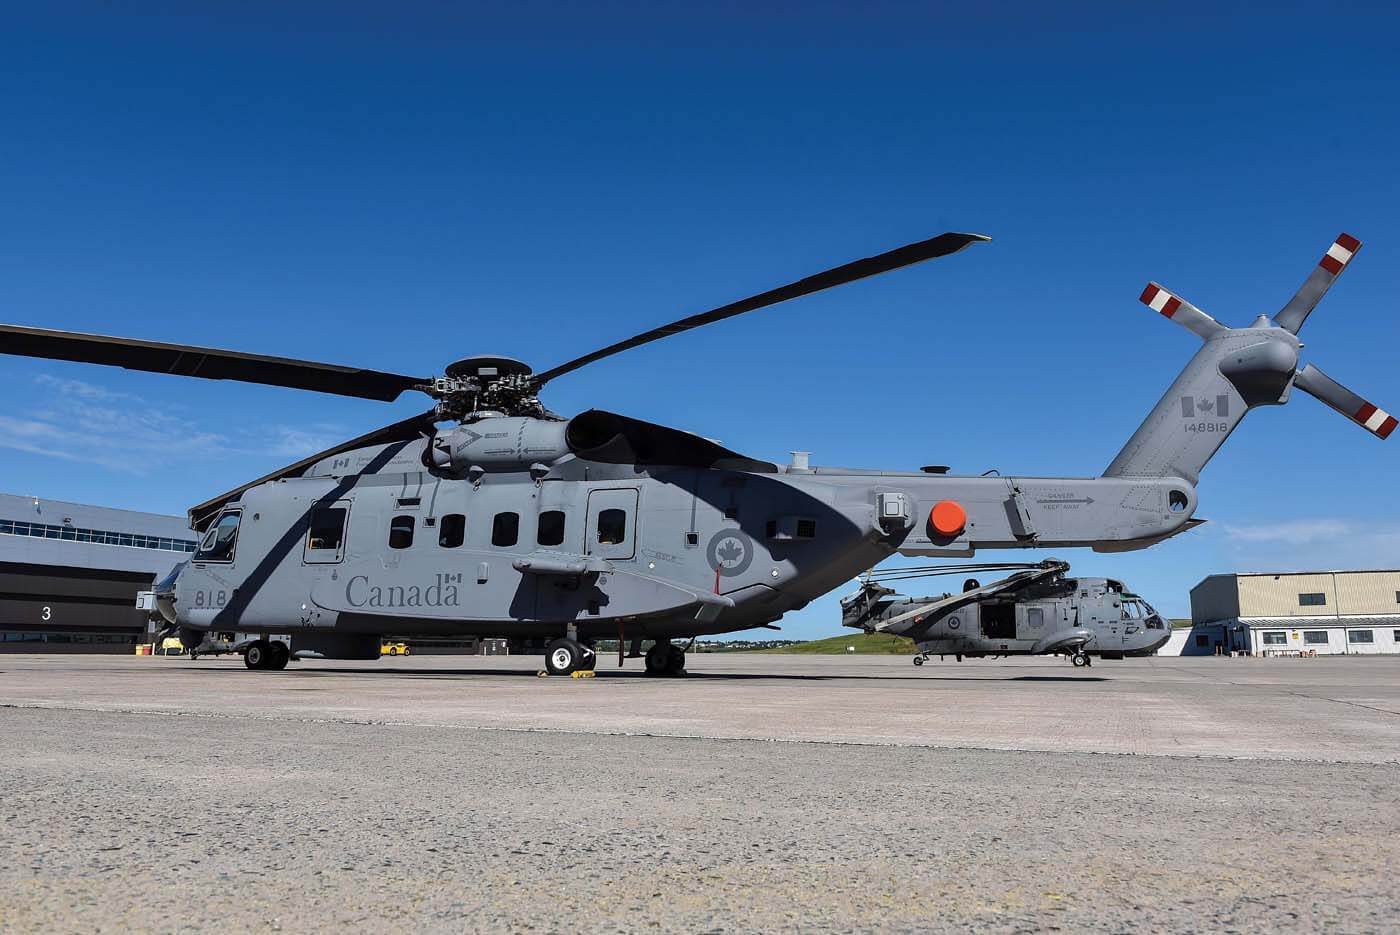 Sikorsky CH-148 Cyclone maritime helicopter 